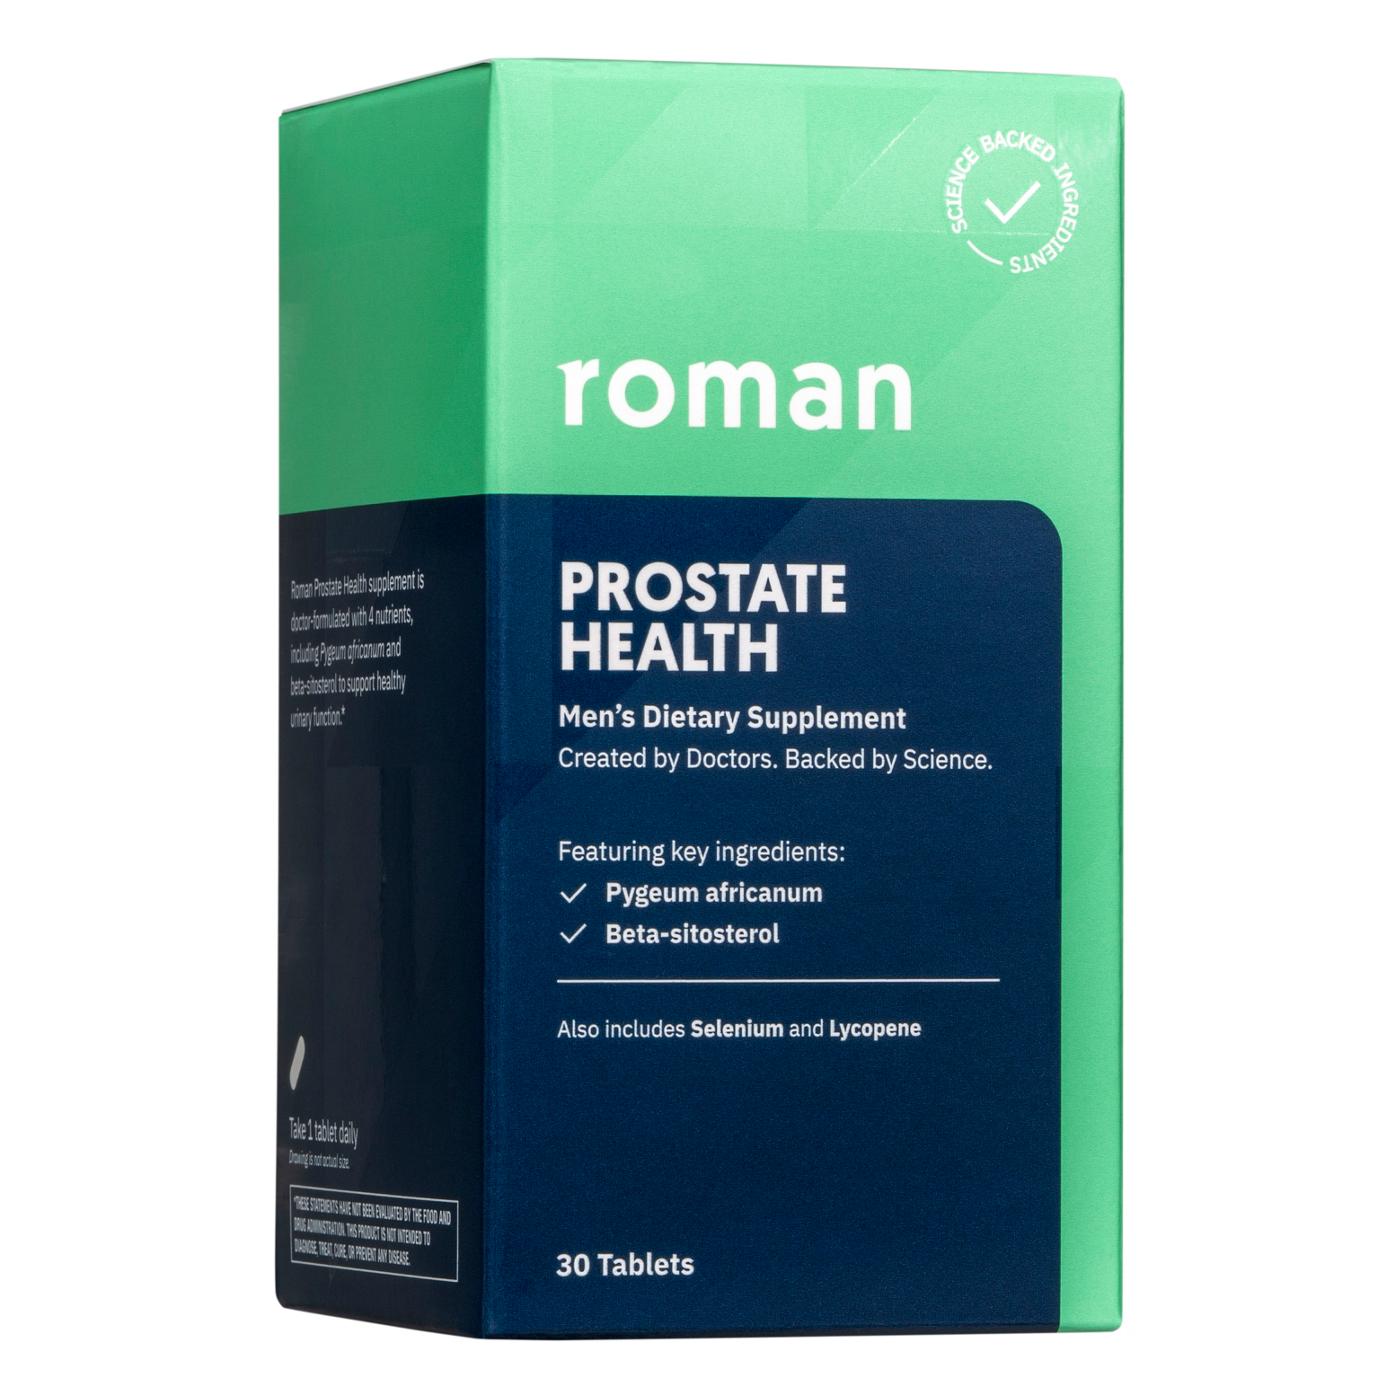 Roman Prostate Health Supplement for Men - 30 Day; image 1 of 2